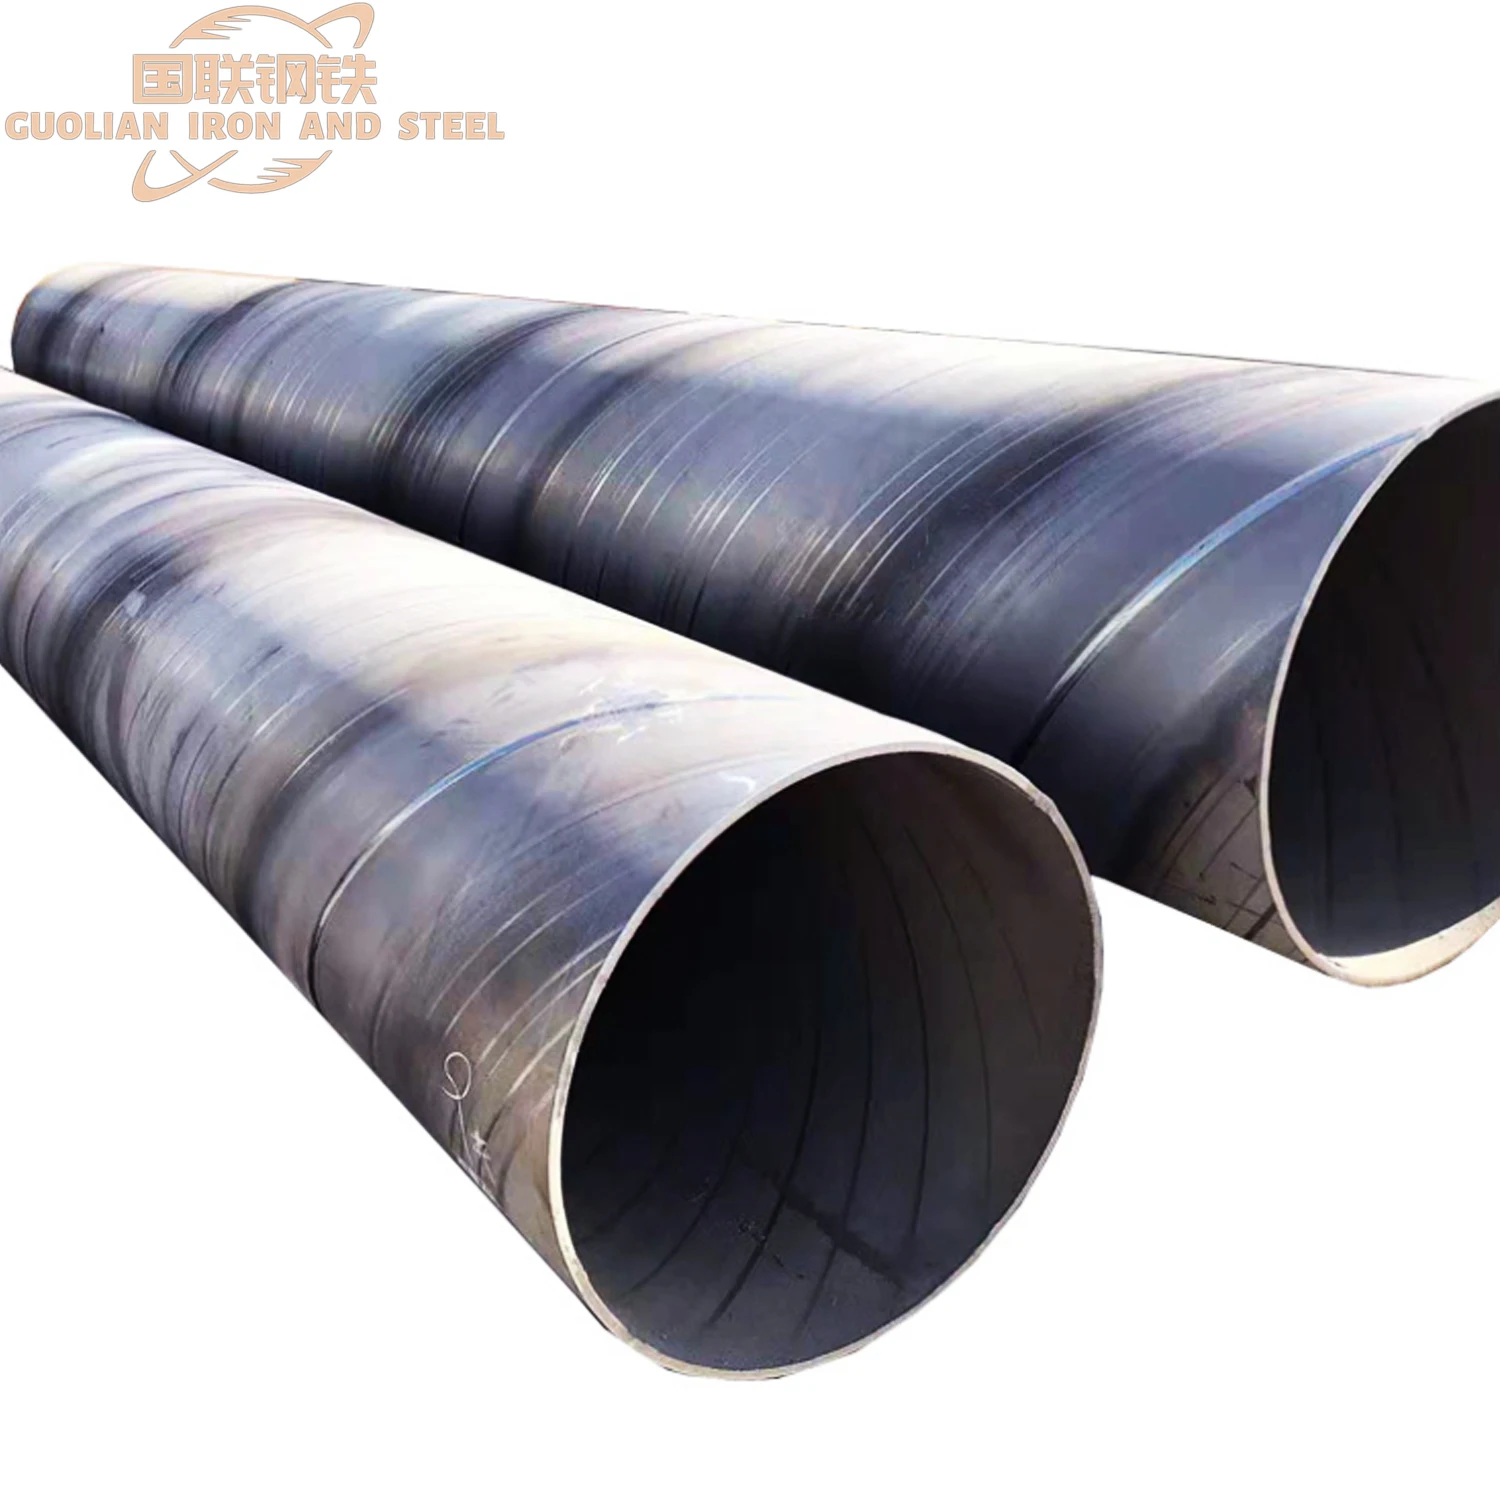 3PE Large Diameter API 5L Grade B spiral Welded Steel Pipe For Liquid Transmission and hydraulic pipeline